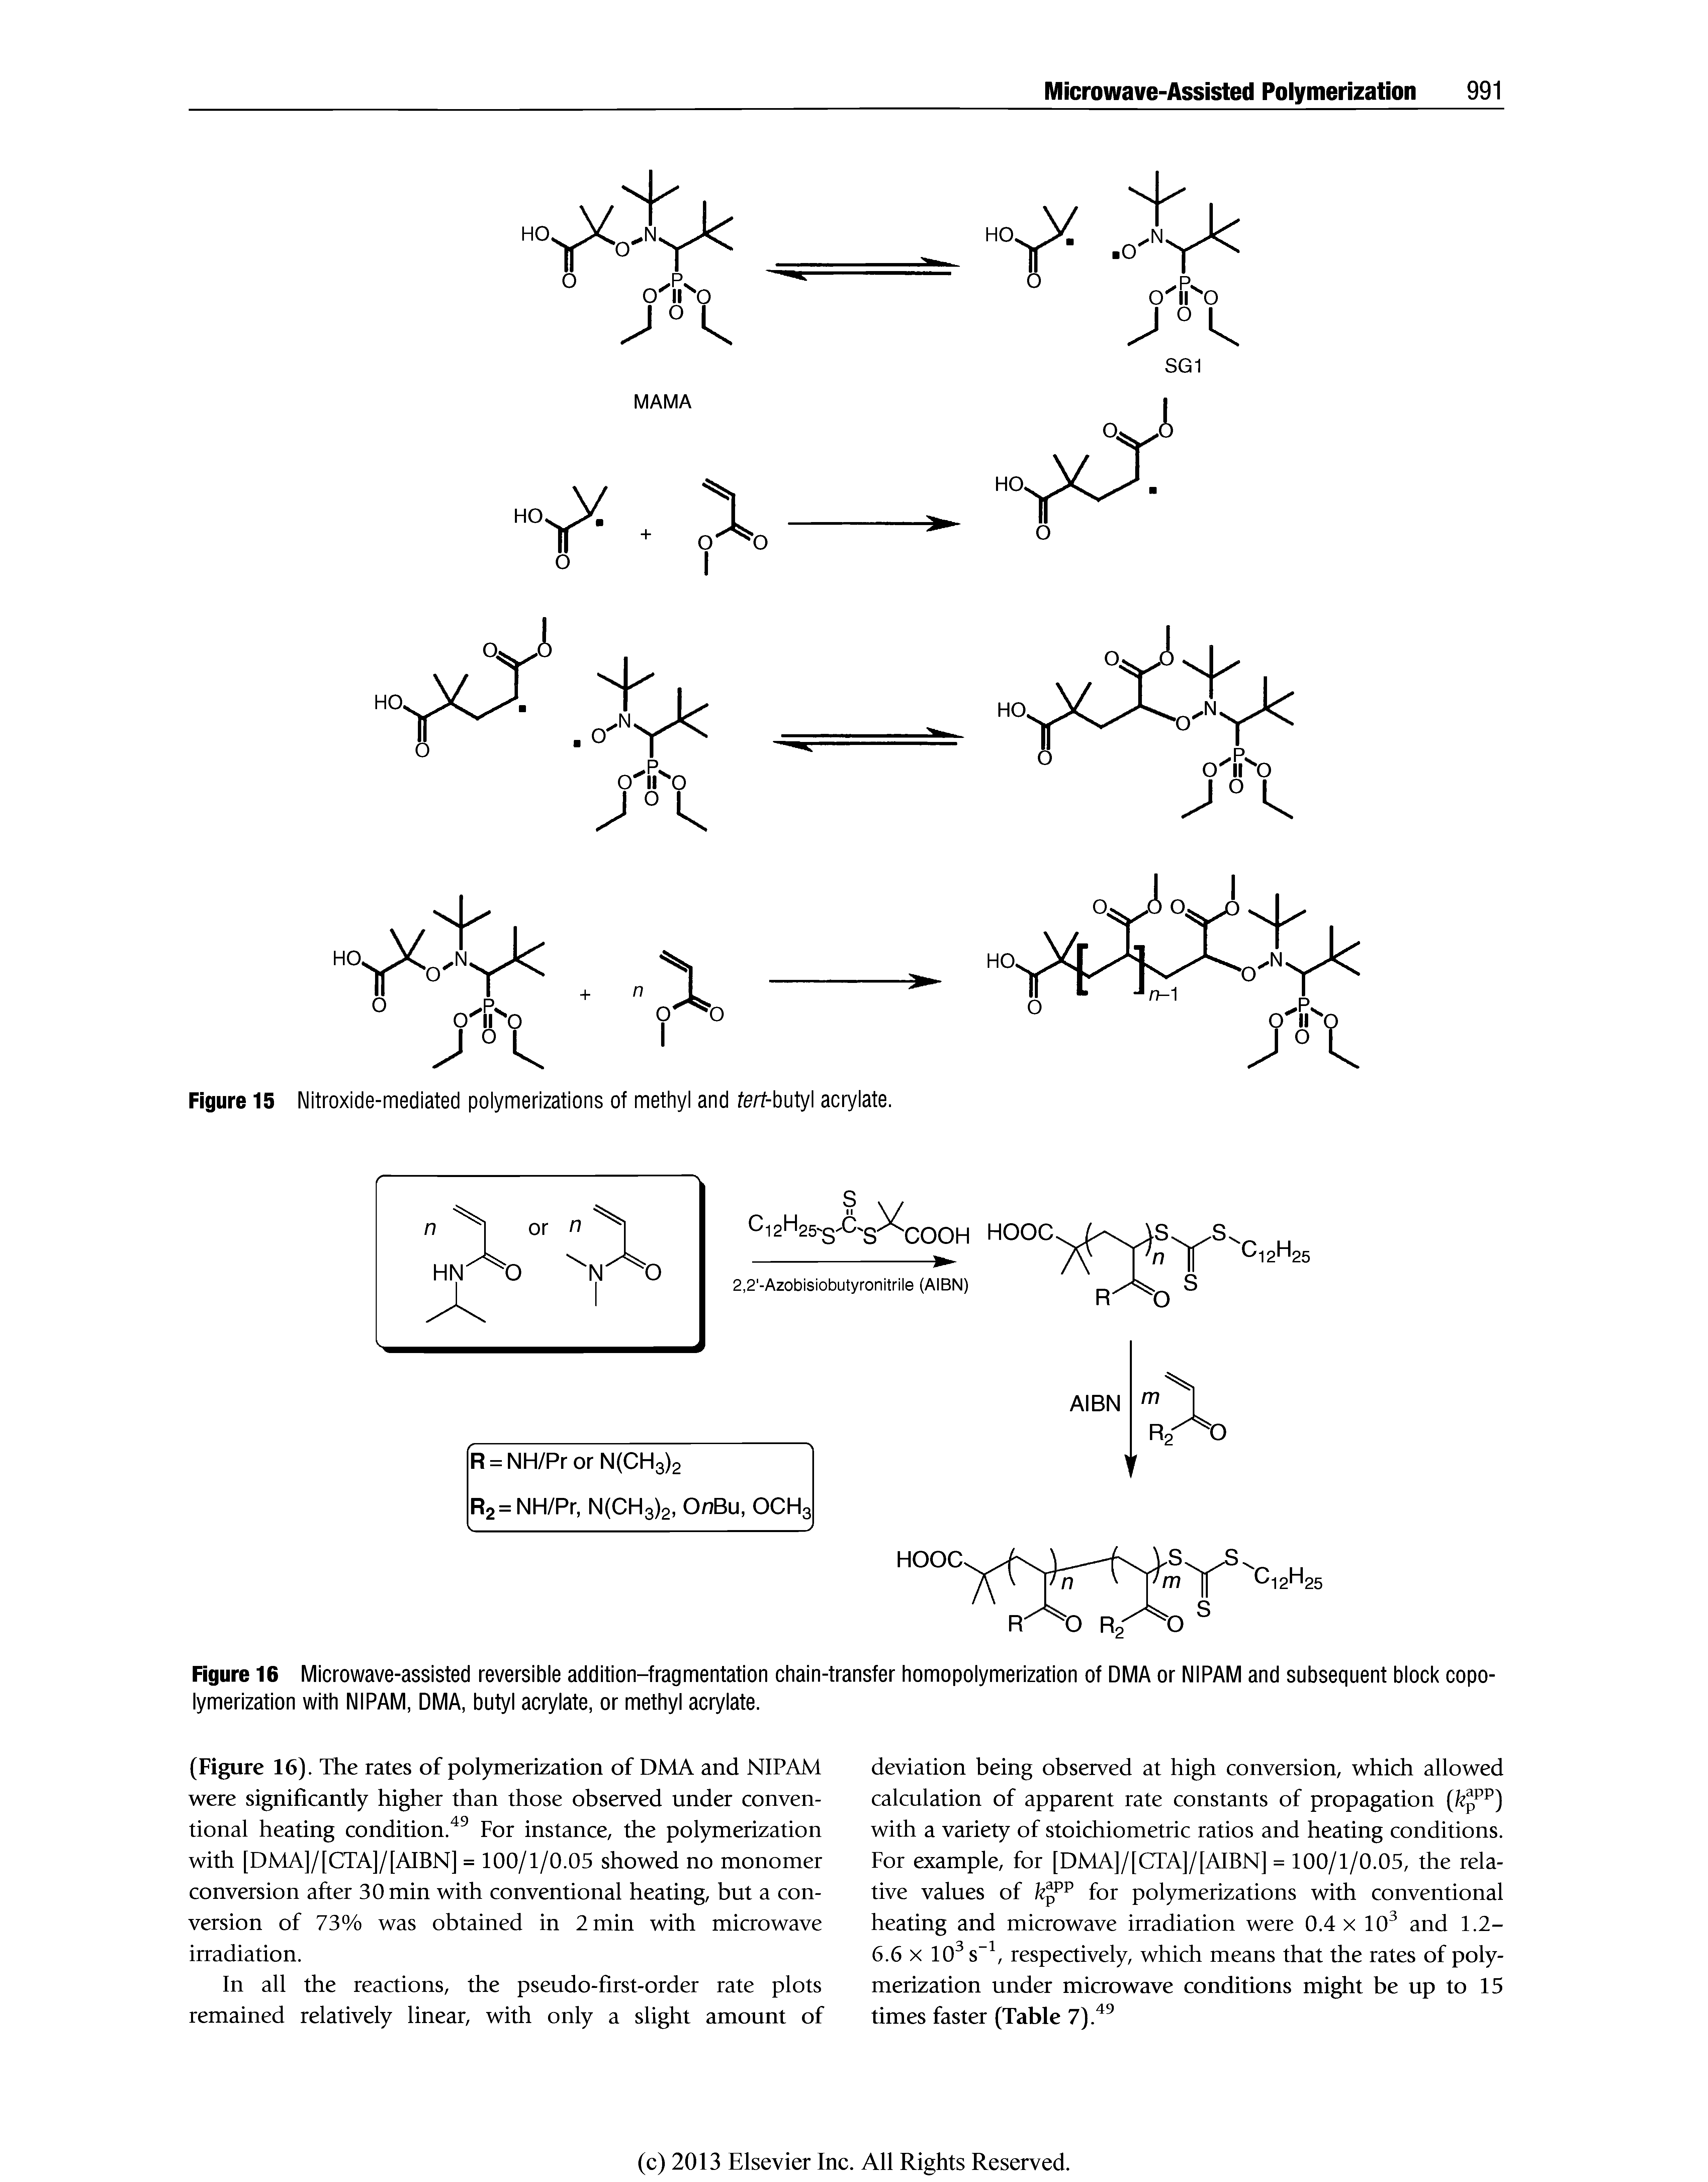 Figure 16 Microwave-assisted reversible addition-fragmentation chain-transfer homopolymerization of DMA or NIPAM and subsequent block copolymerization with NIPAM, DMA, butyl acrylate, or methyl acrylate.